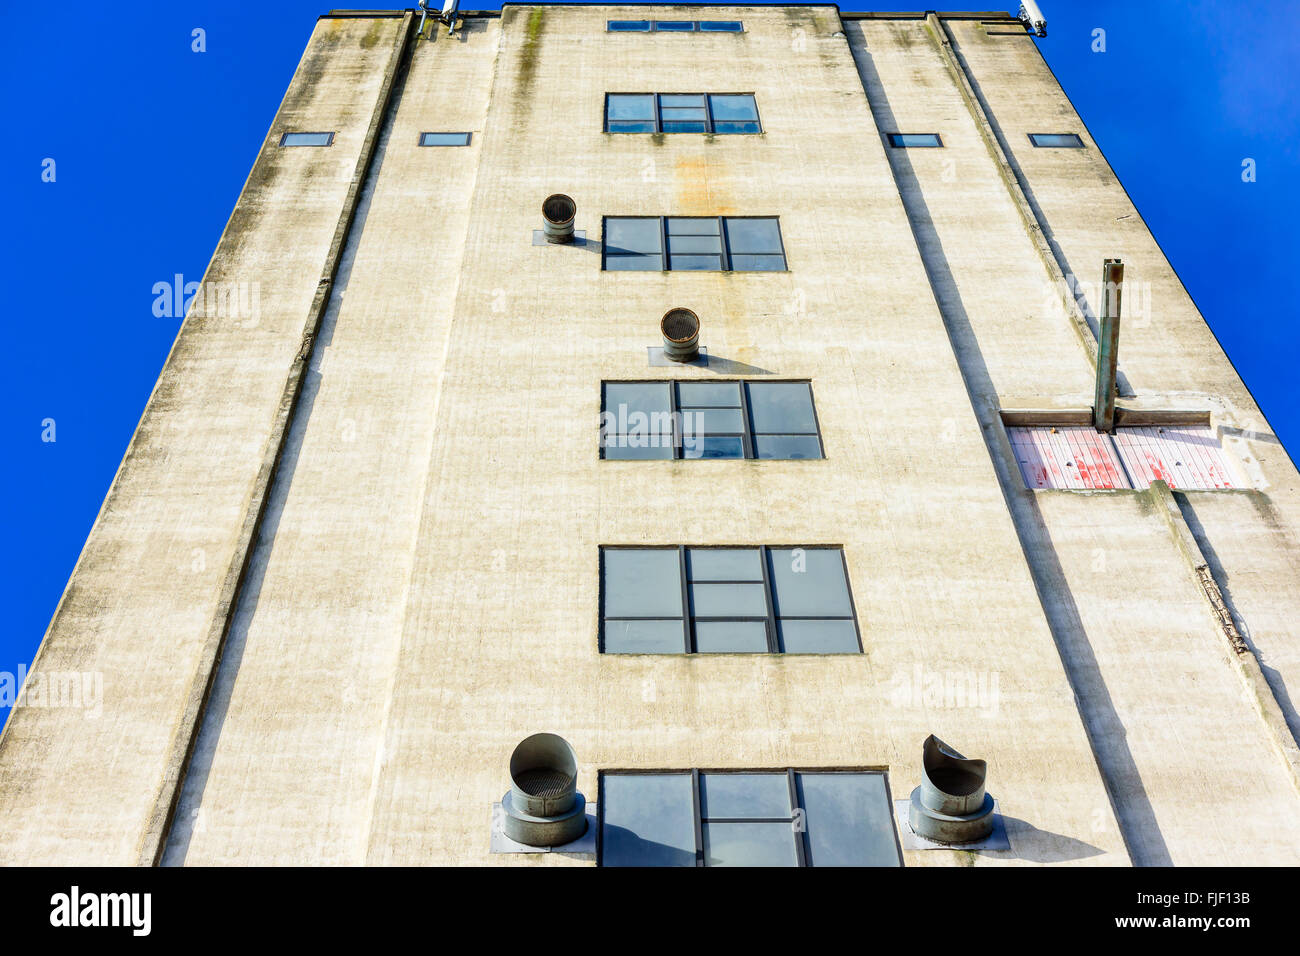 A tall industrial building up close. The abandoned building has some interesting air vents sticking out on the facade. Blue sky Stock Photo